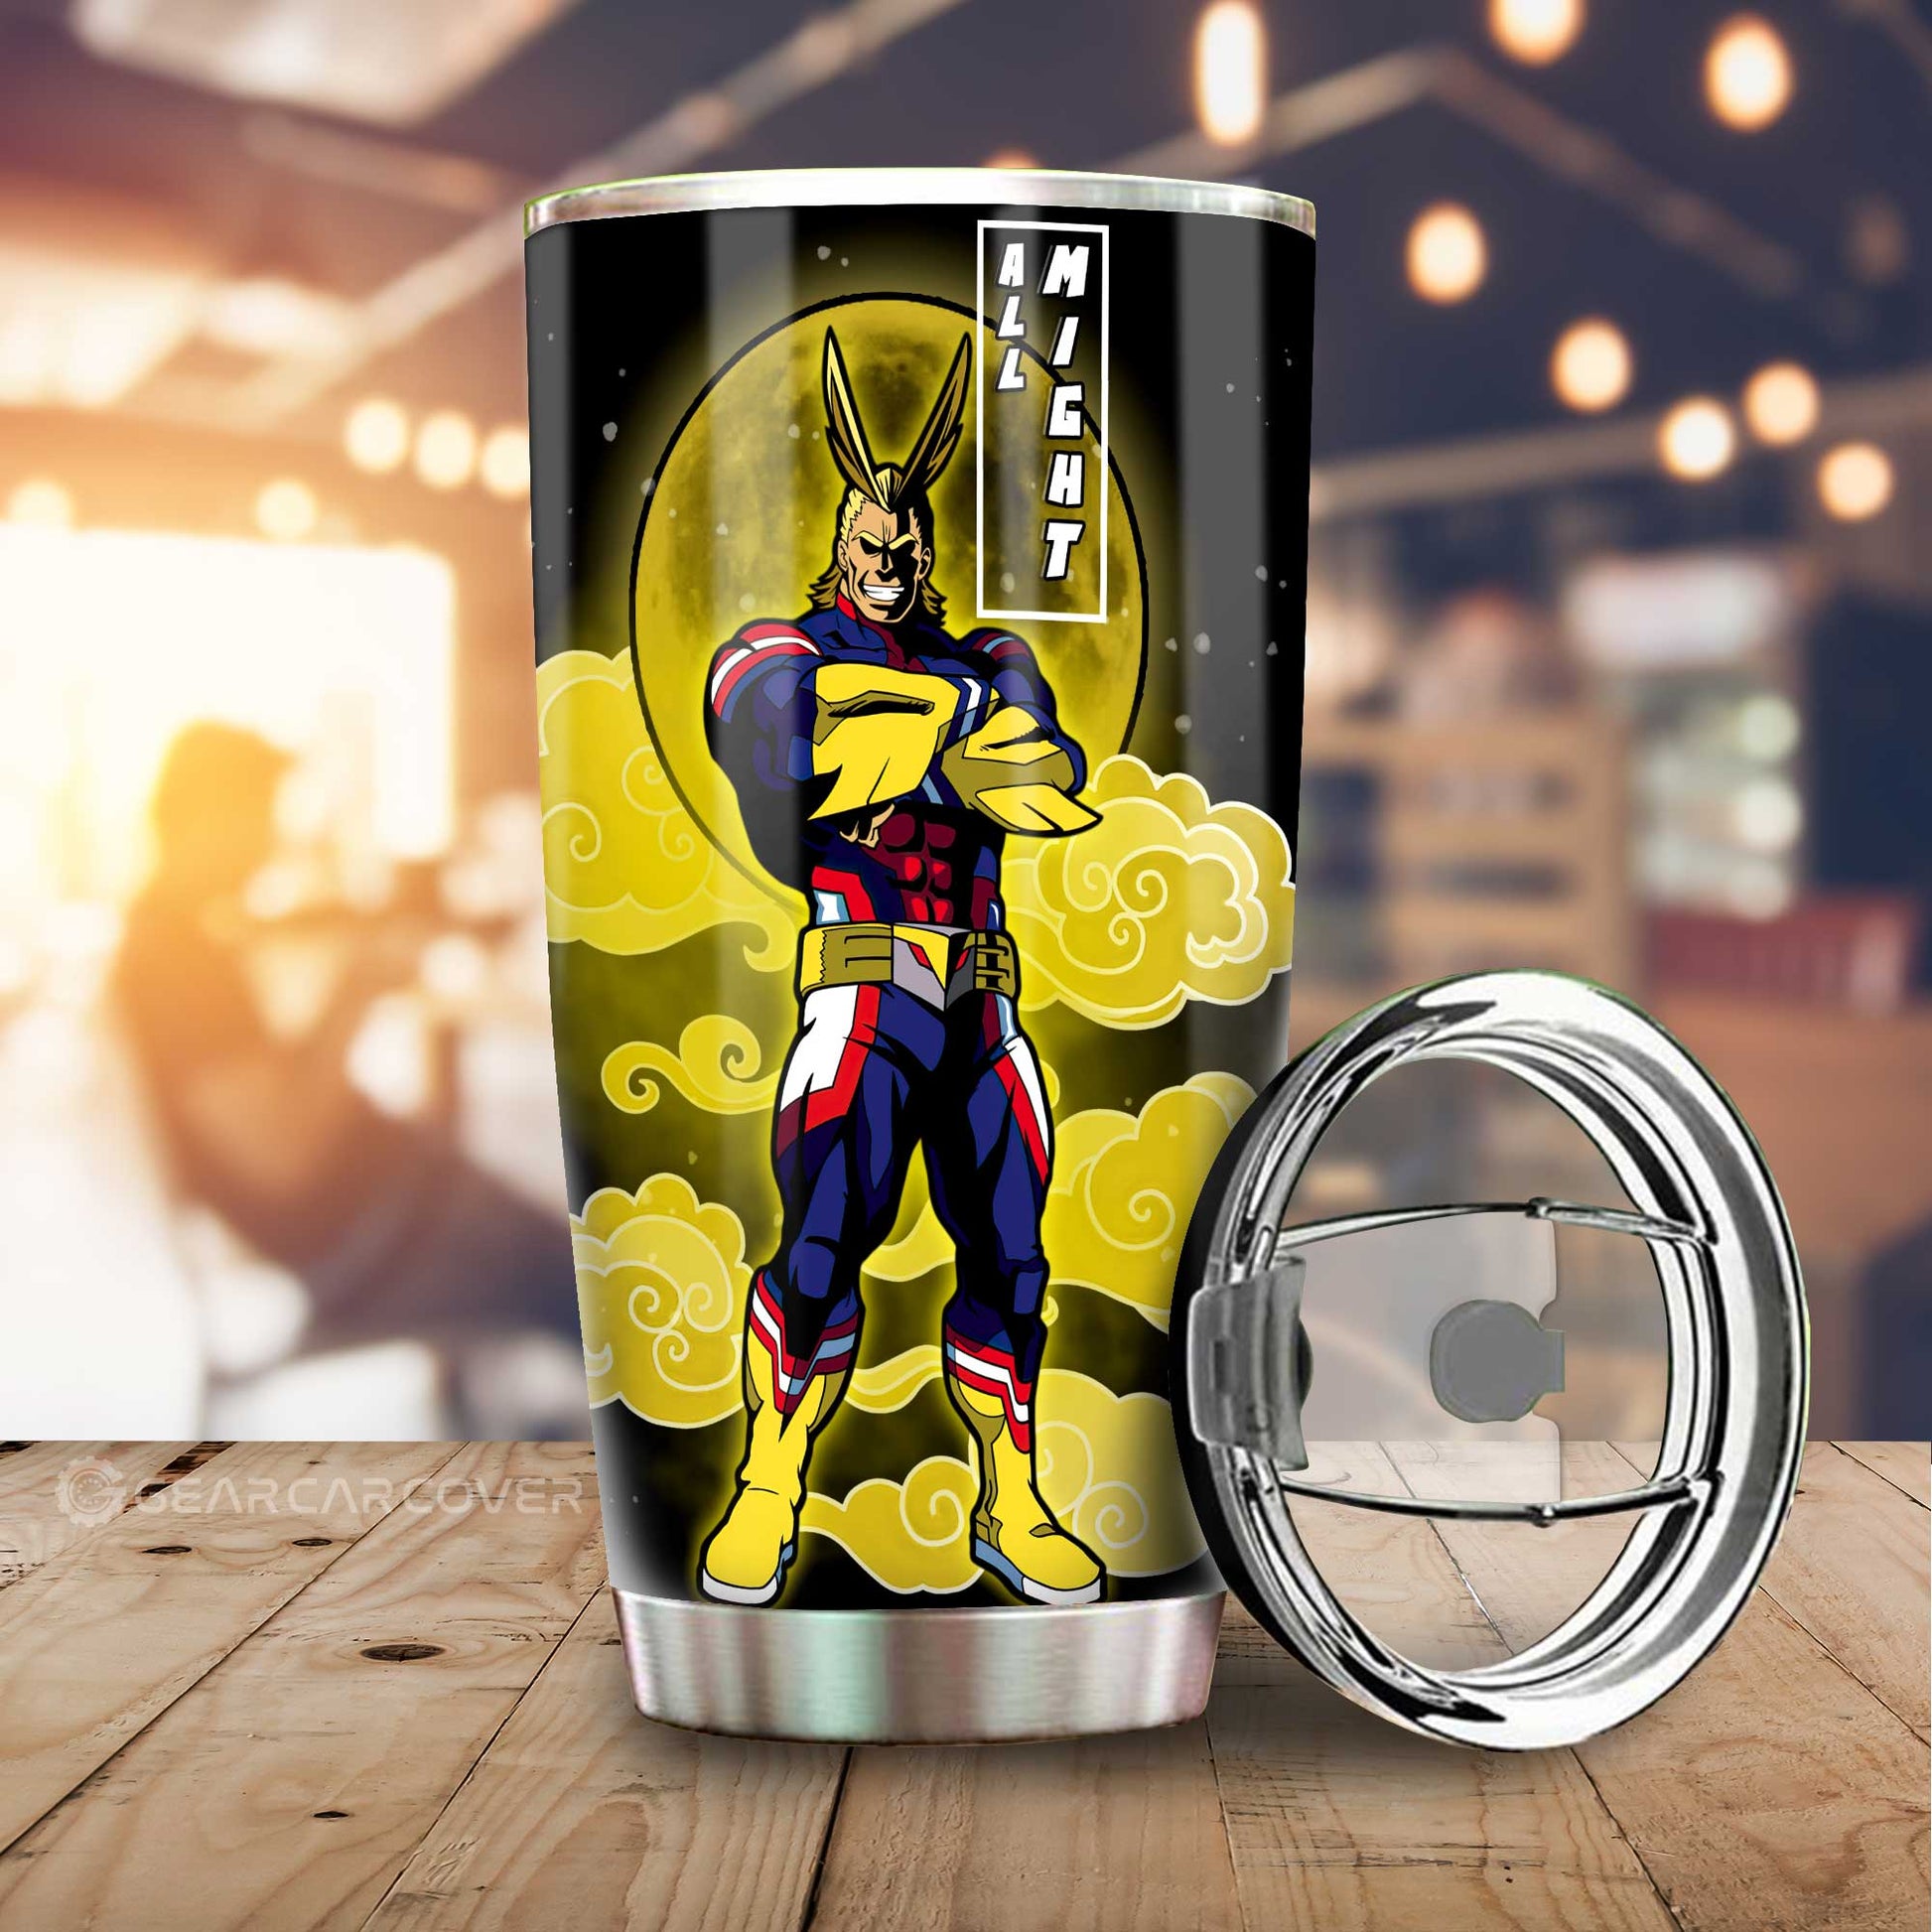 Deku And All Might Tumbler Cup Custom My Hero Academia Anime Car Accessories - Gearcarcover - 2